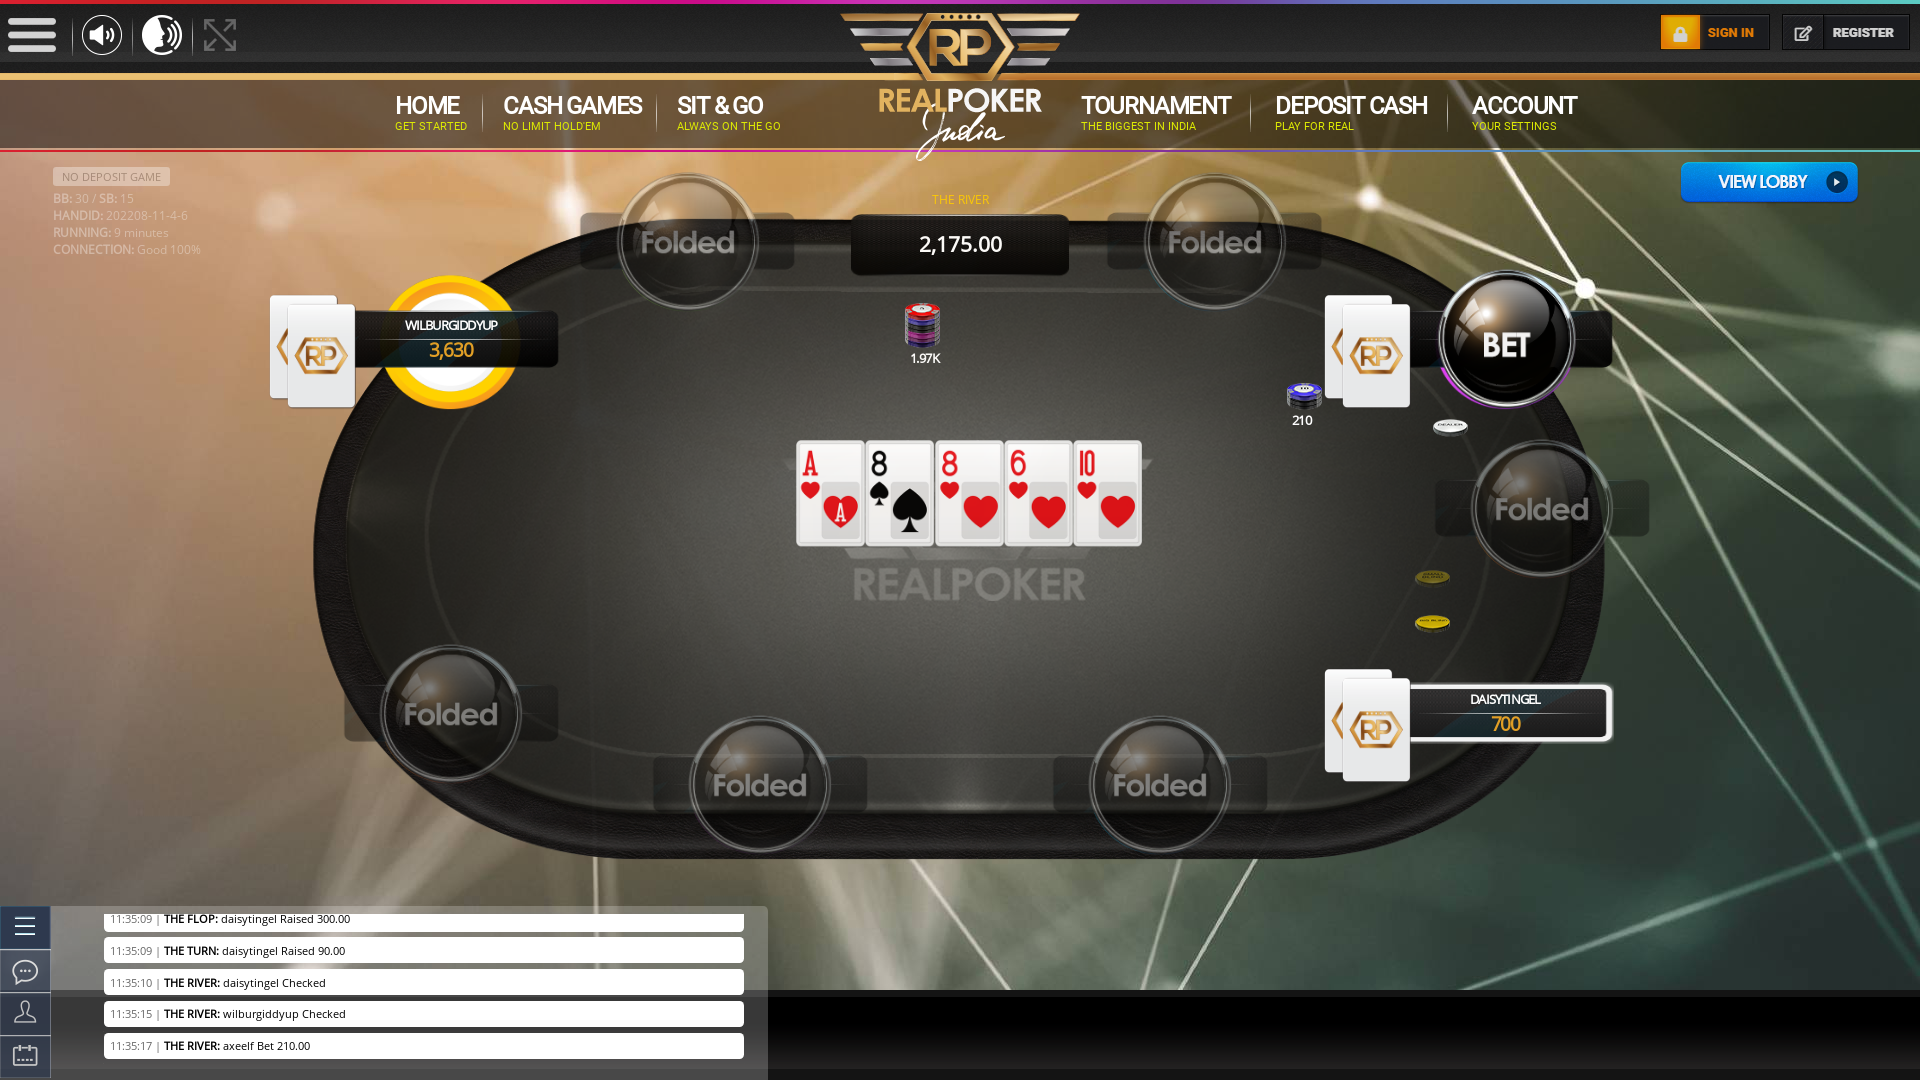 Online poker on a 10 player table in the 9th minute match up